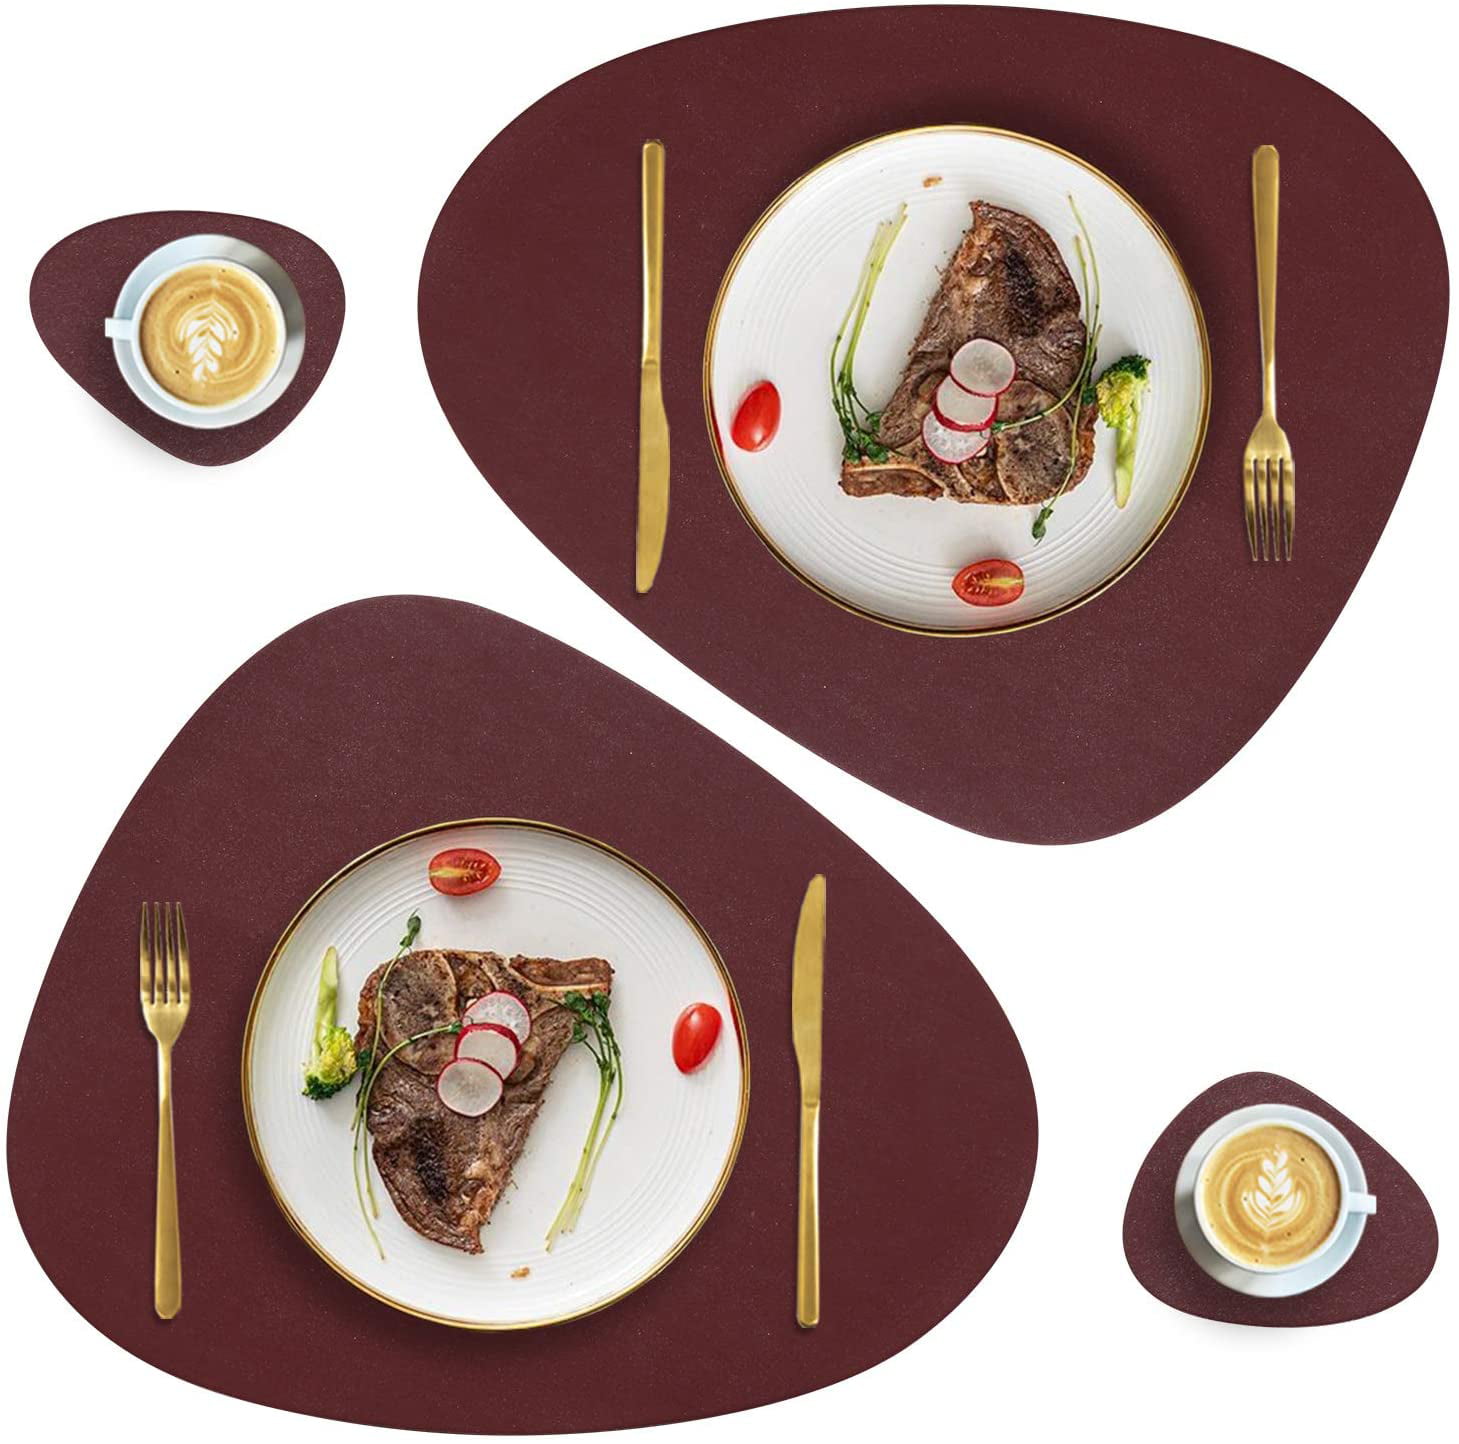 VIVENS Placemats Brown PU Leather Table Mats and Coasters Set of 2,Heat Insulation Stain Resistant Non-Slip Placemat Waterproof Washable Colourful Table Mats